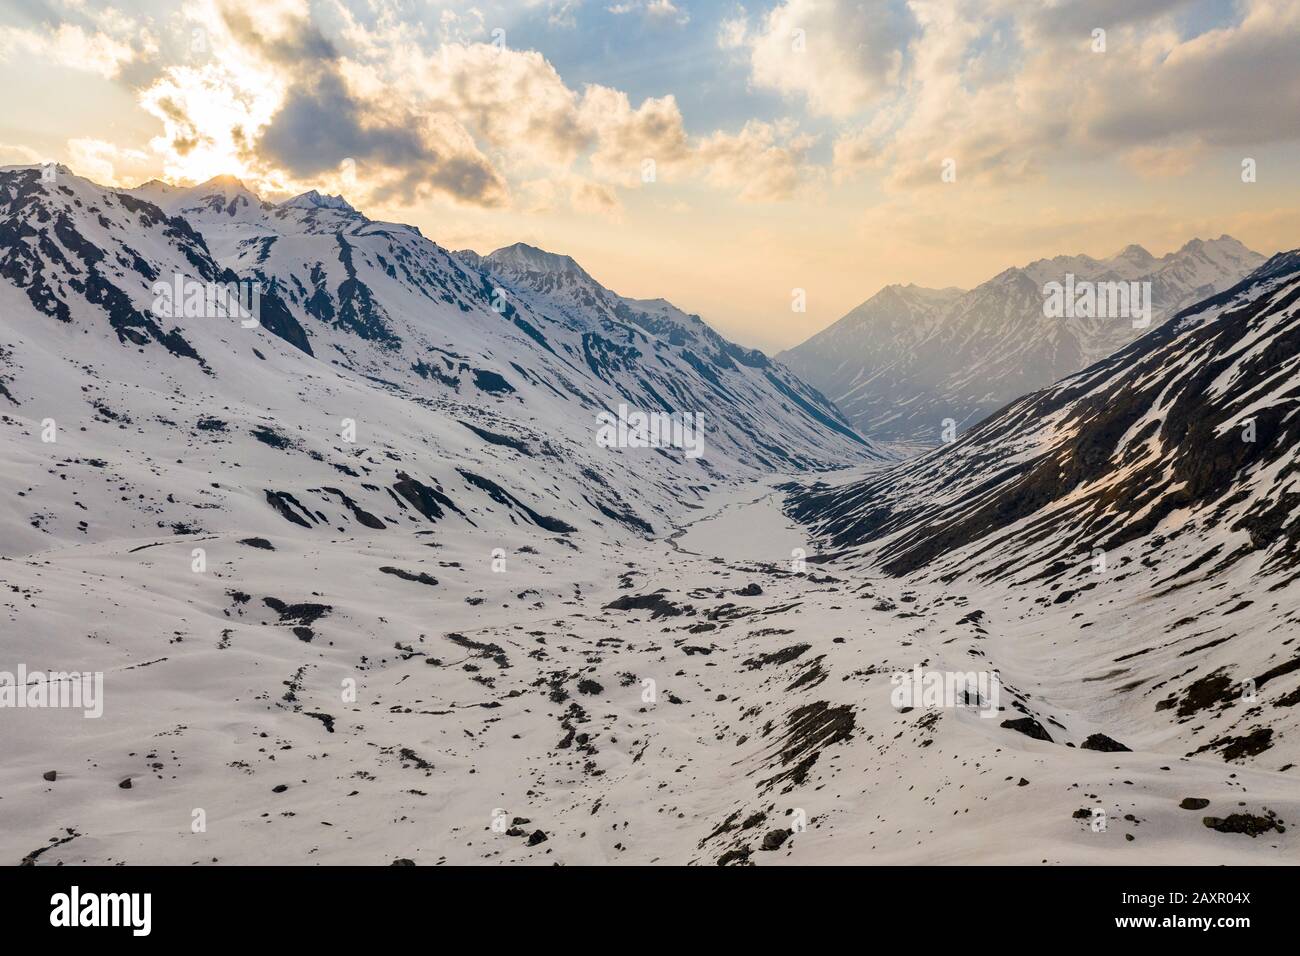 Aline glacial snow covered valley in the mountains, Himalaya Nepal Stock Photo